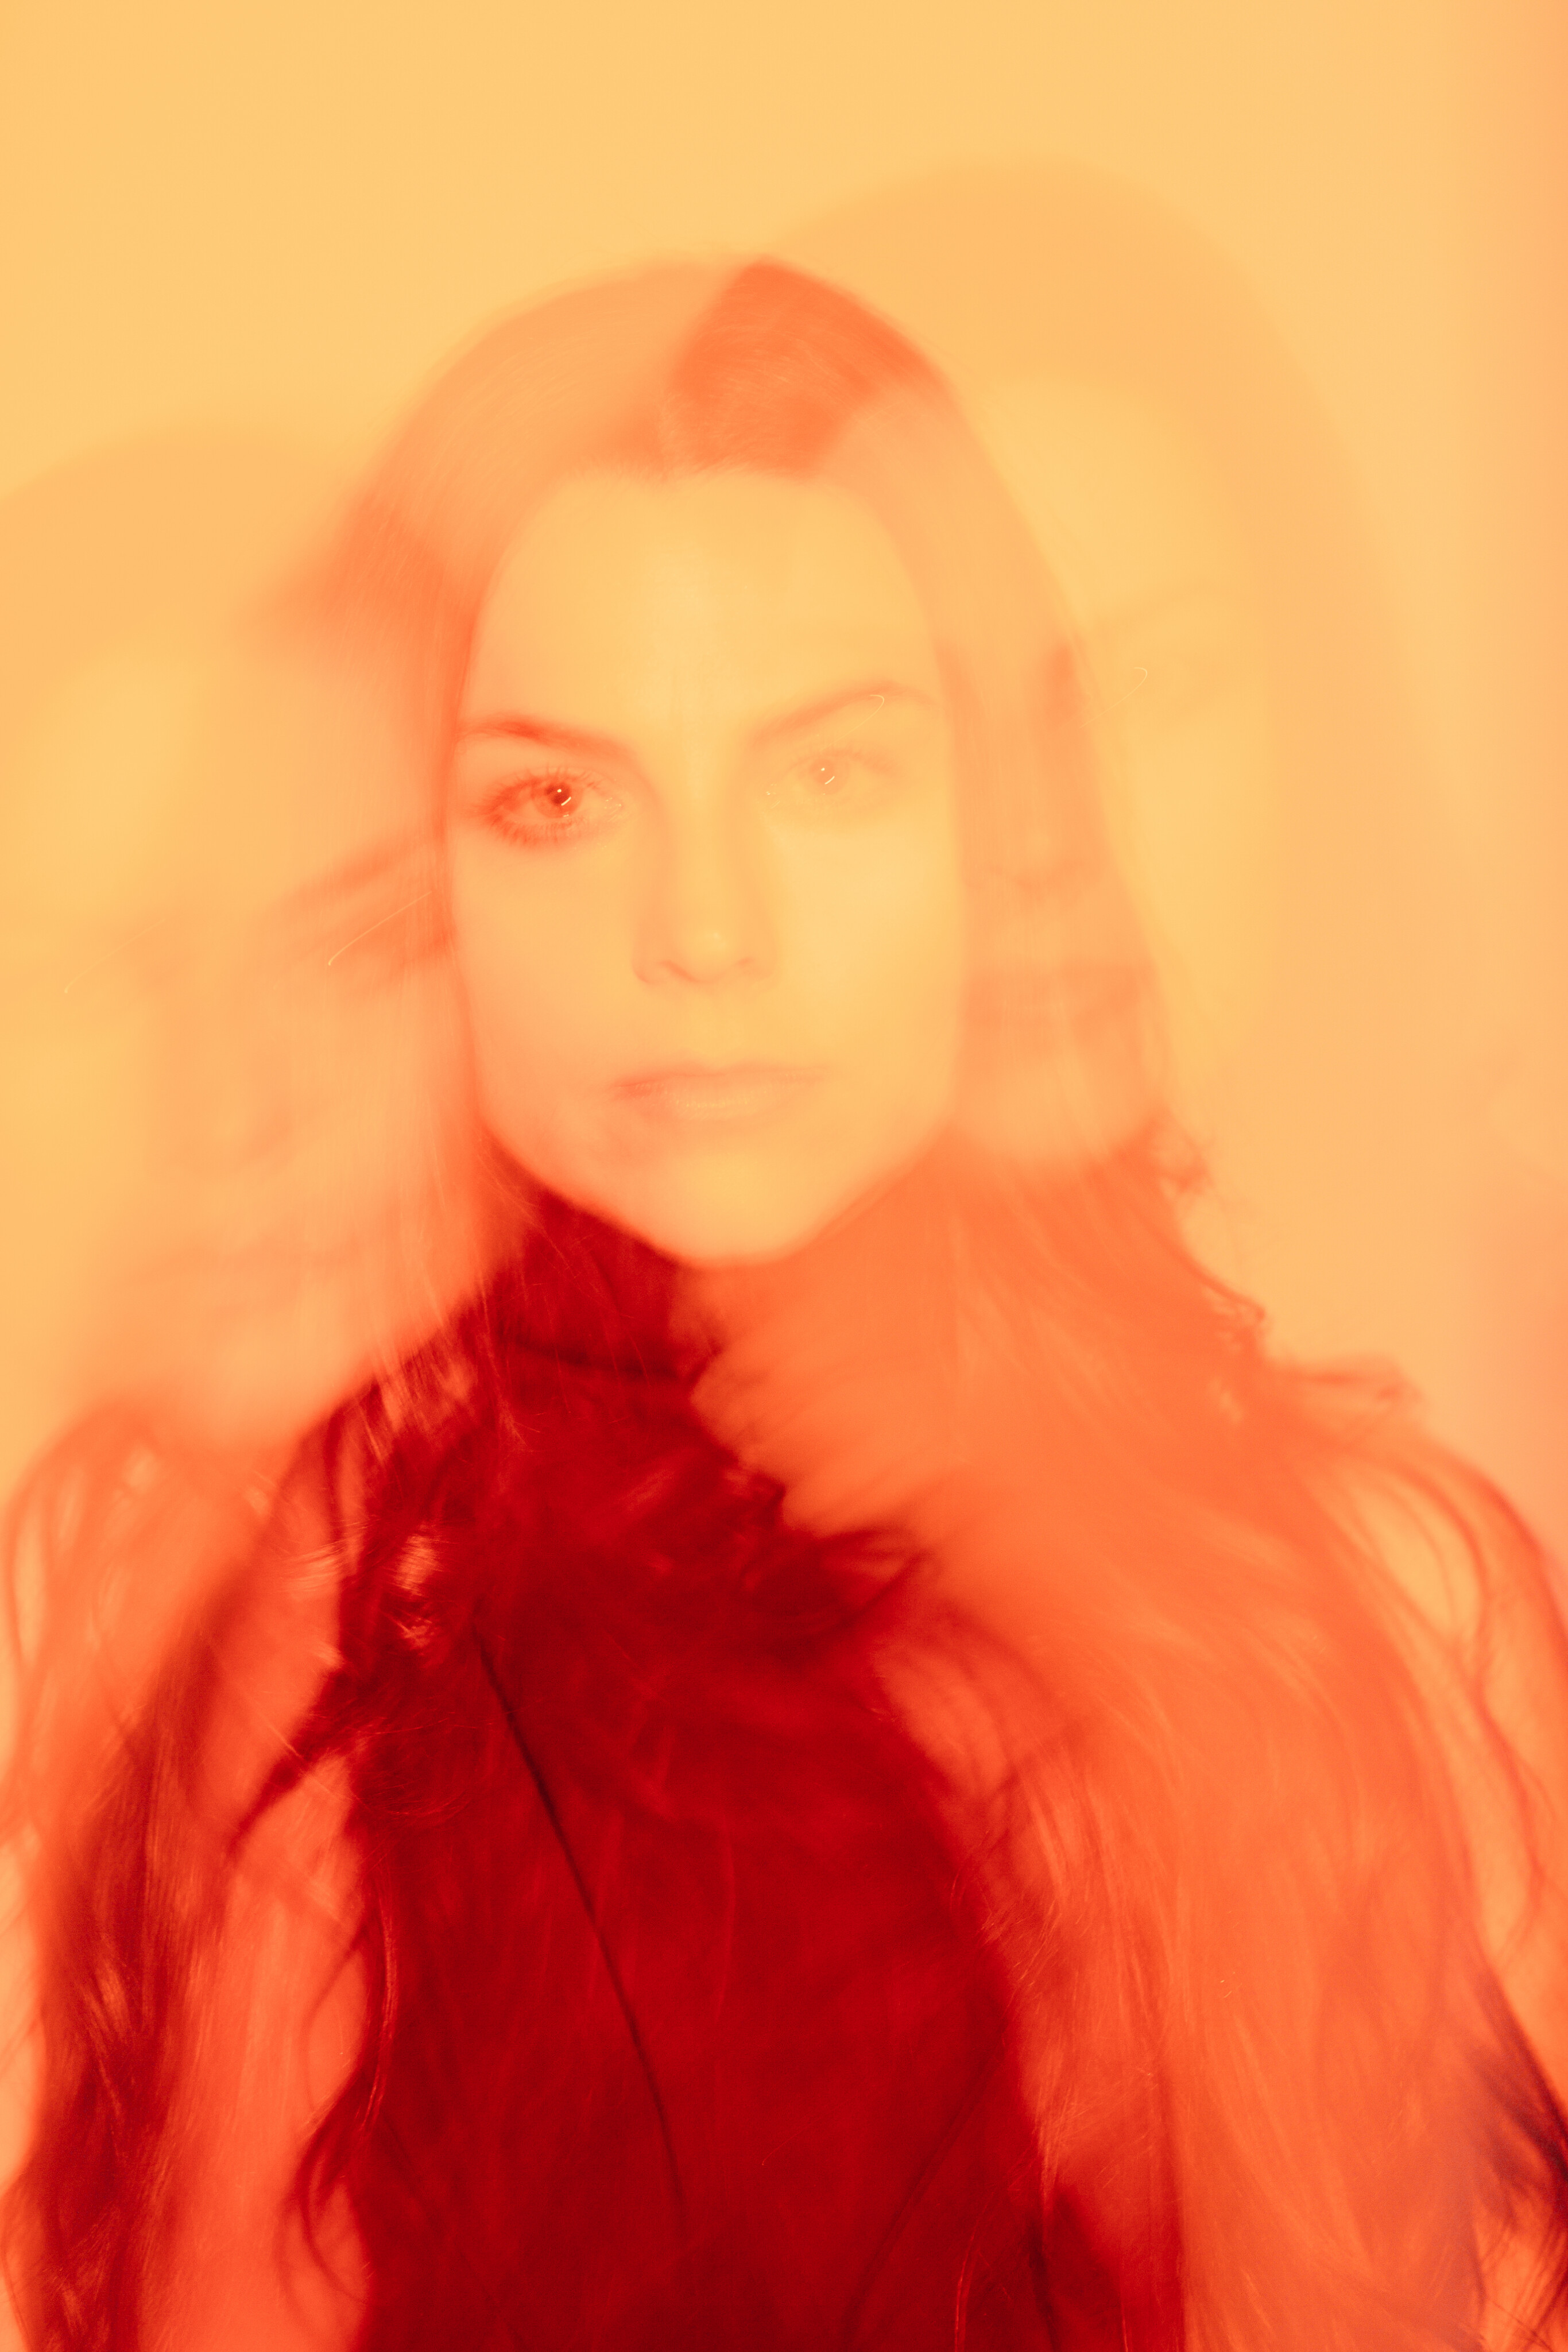 2731x4096
Keywords: amy lee;recover;photoshoot;covers;2016